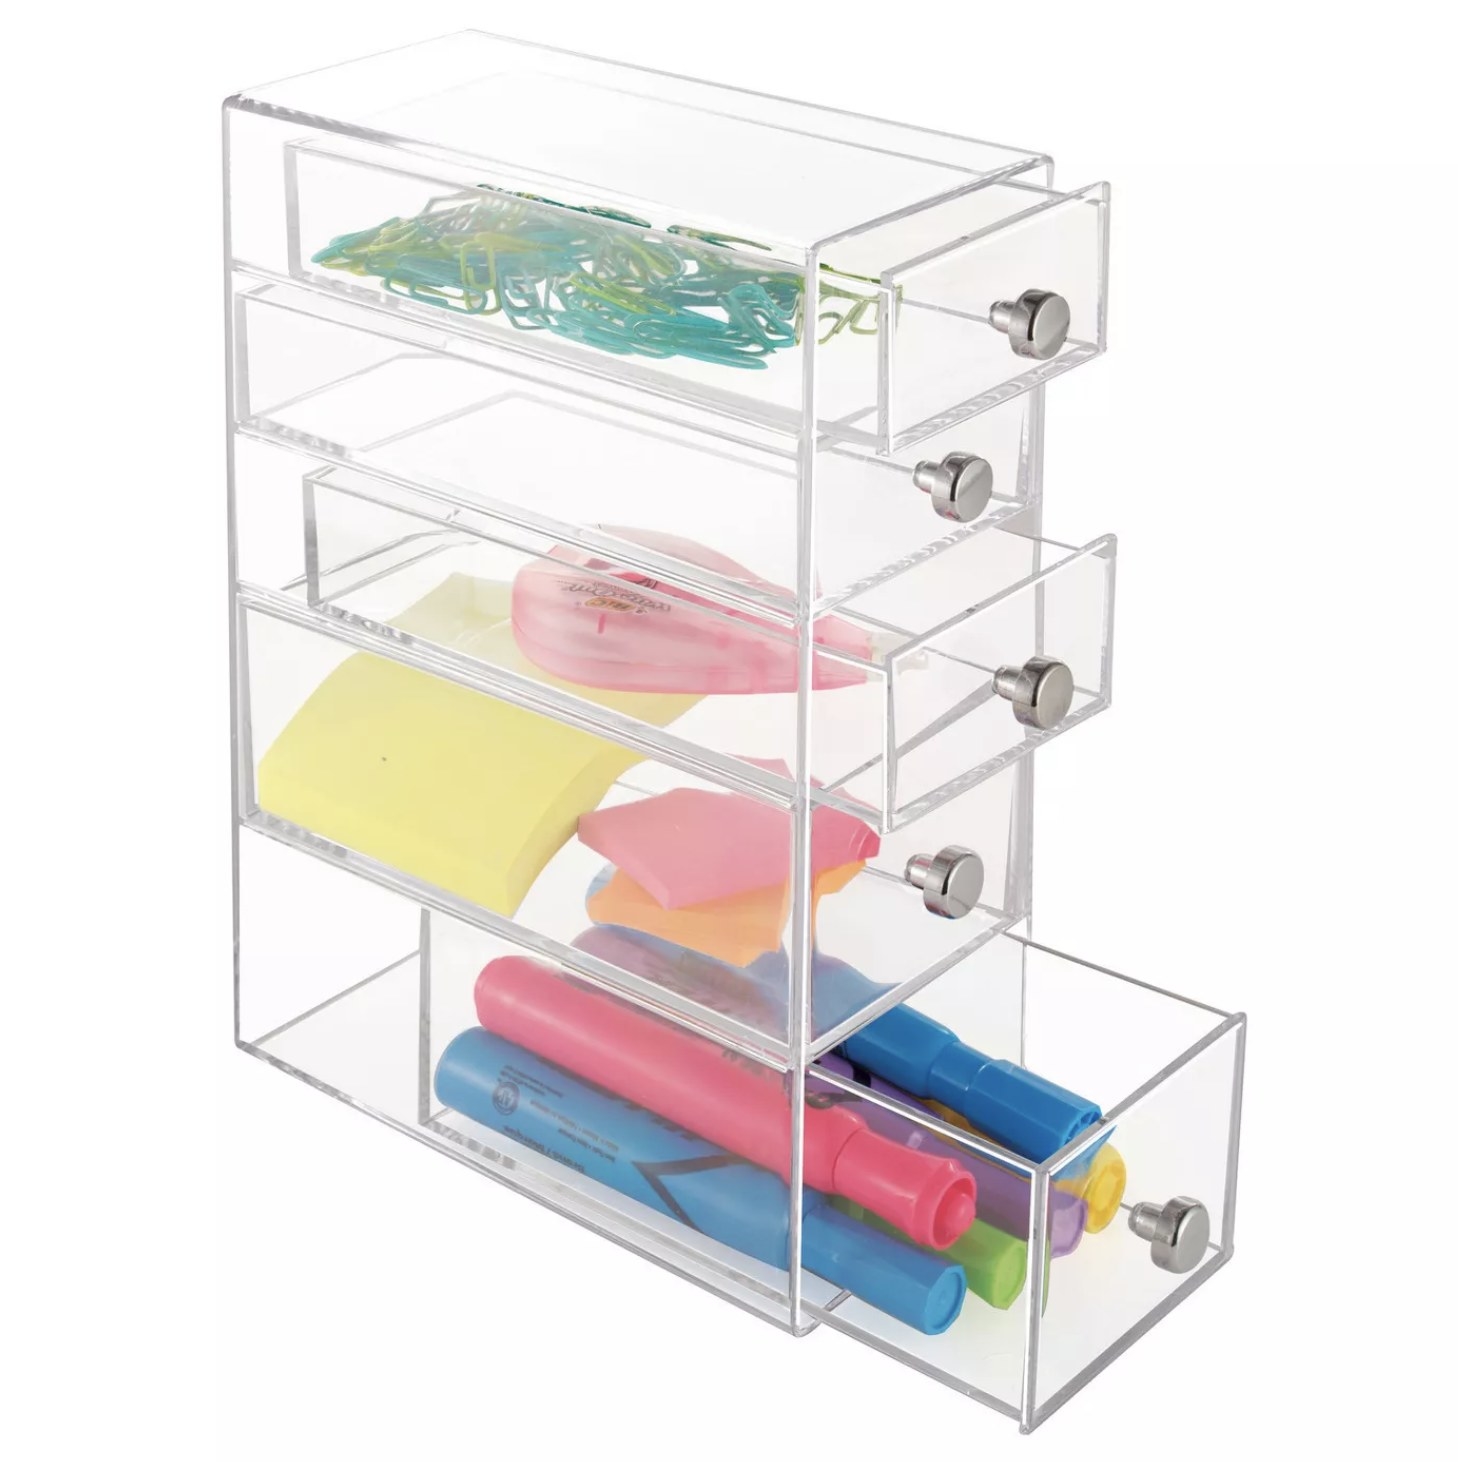 A clear, vertical set of drawers with three small drawers at the top holding paper clips, highlighters, sticky notes, and more